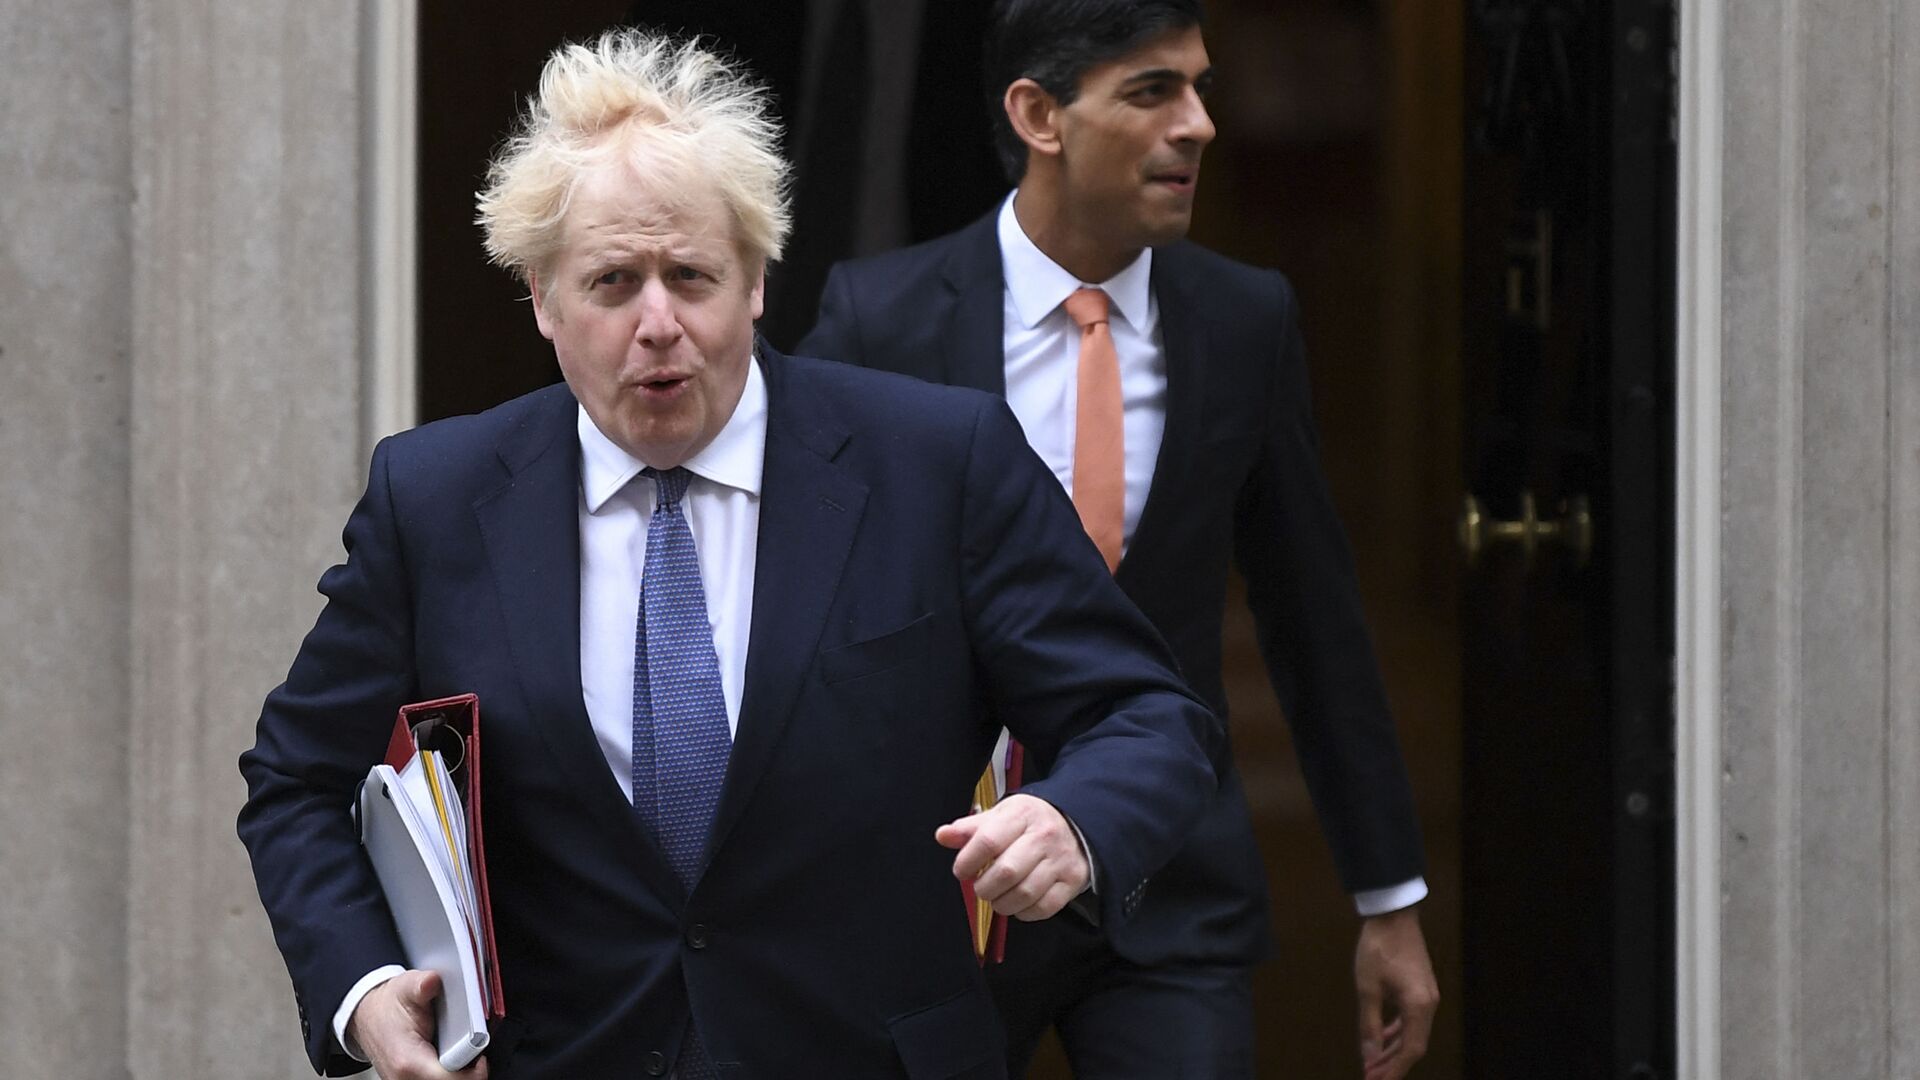 Britain's Prime Minister Boris Johnson (L) and Britain's Chancellor of the Exchequer Rishi Sunak (R) leave 10 Downing Street to attend the weekly cabinet meeting in London on October 13, 2020 held at the Foreign, Commonwealth and Development Office - Sputnik International, 1920, 19.03.2022